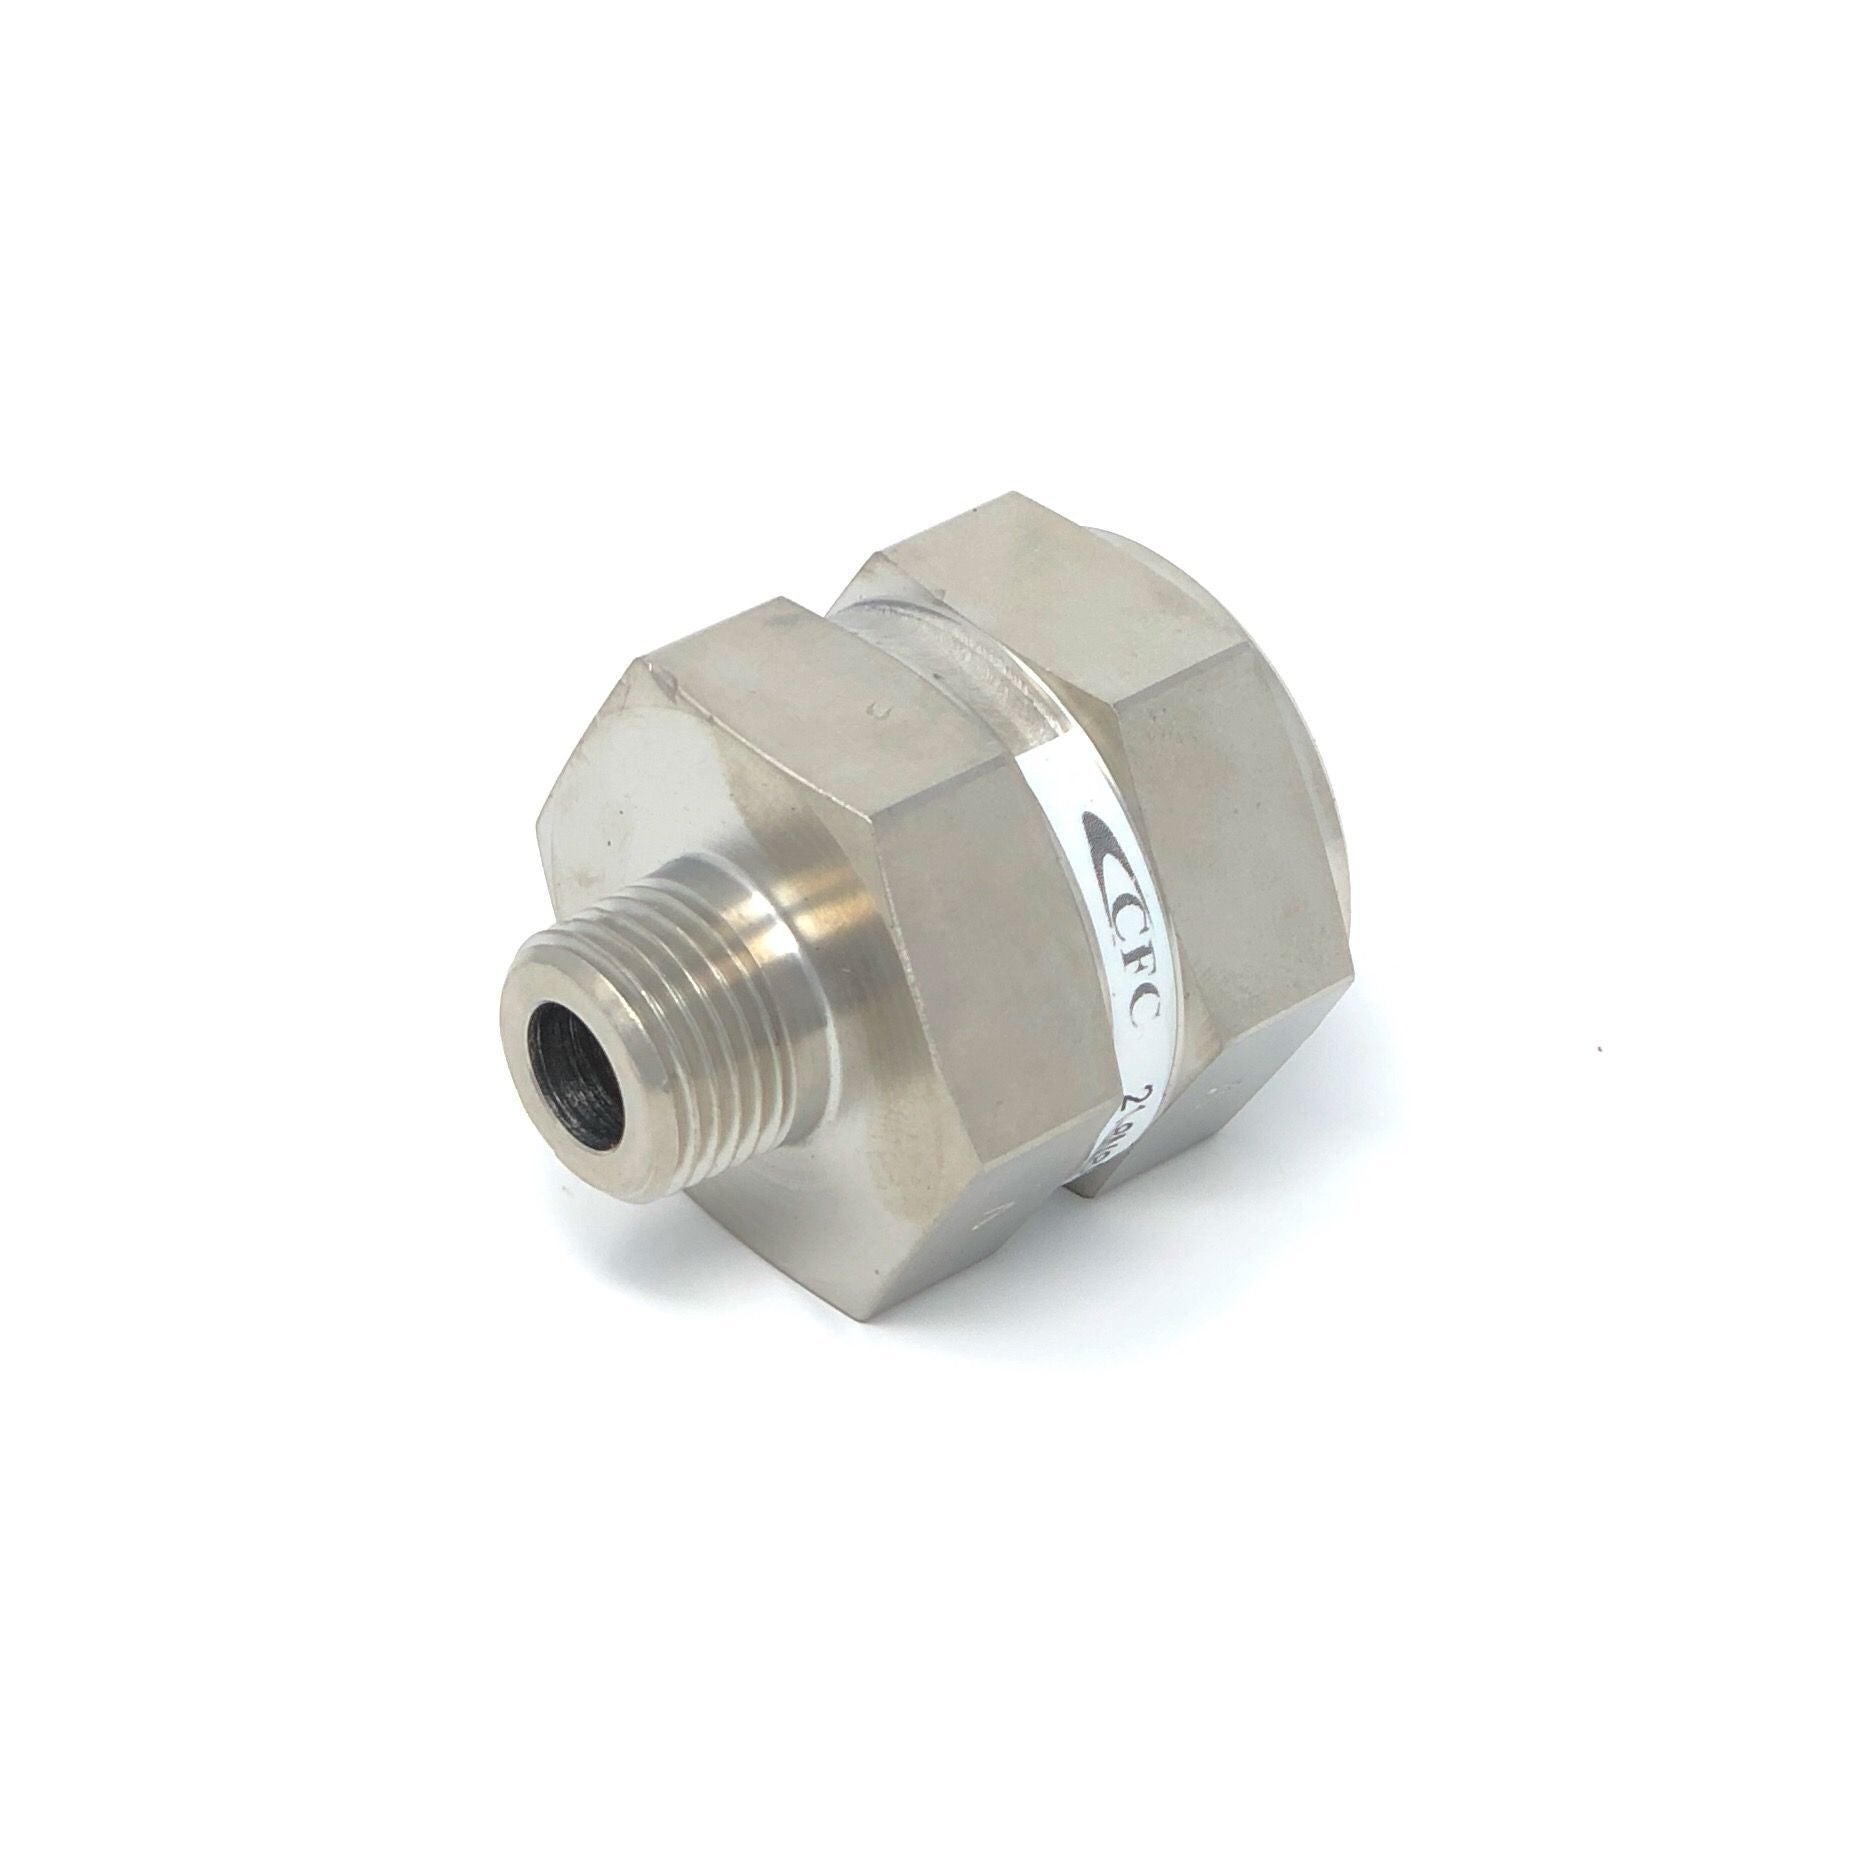 21-4T4T-40S : Chase High Pressure Inline Filter, 6000psi, 1/4" 37 Degree Flare, 40 Micron, No Visual Indicator, No Bypass